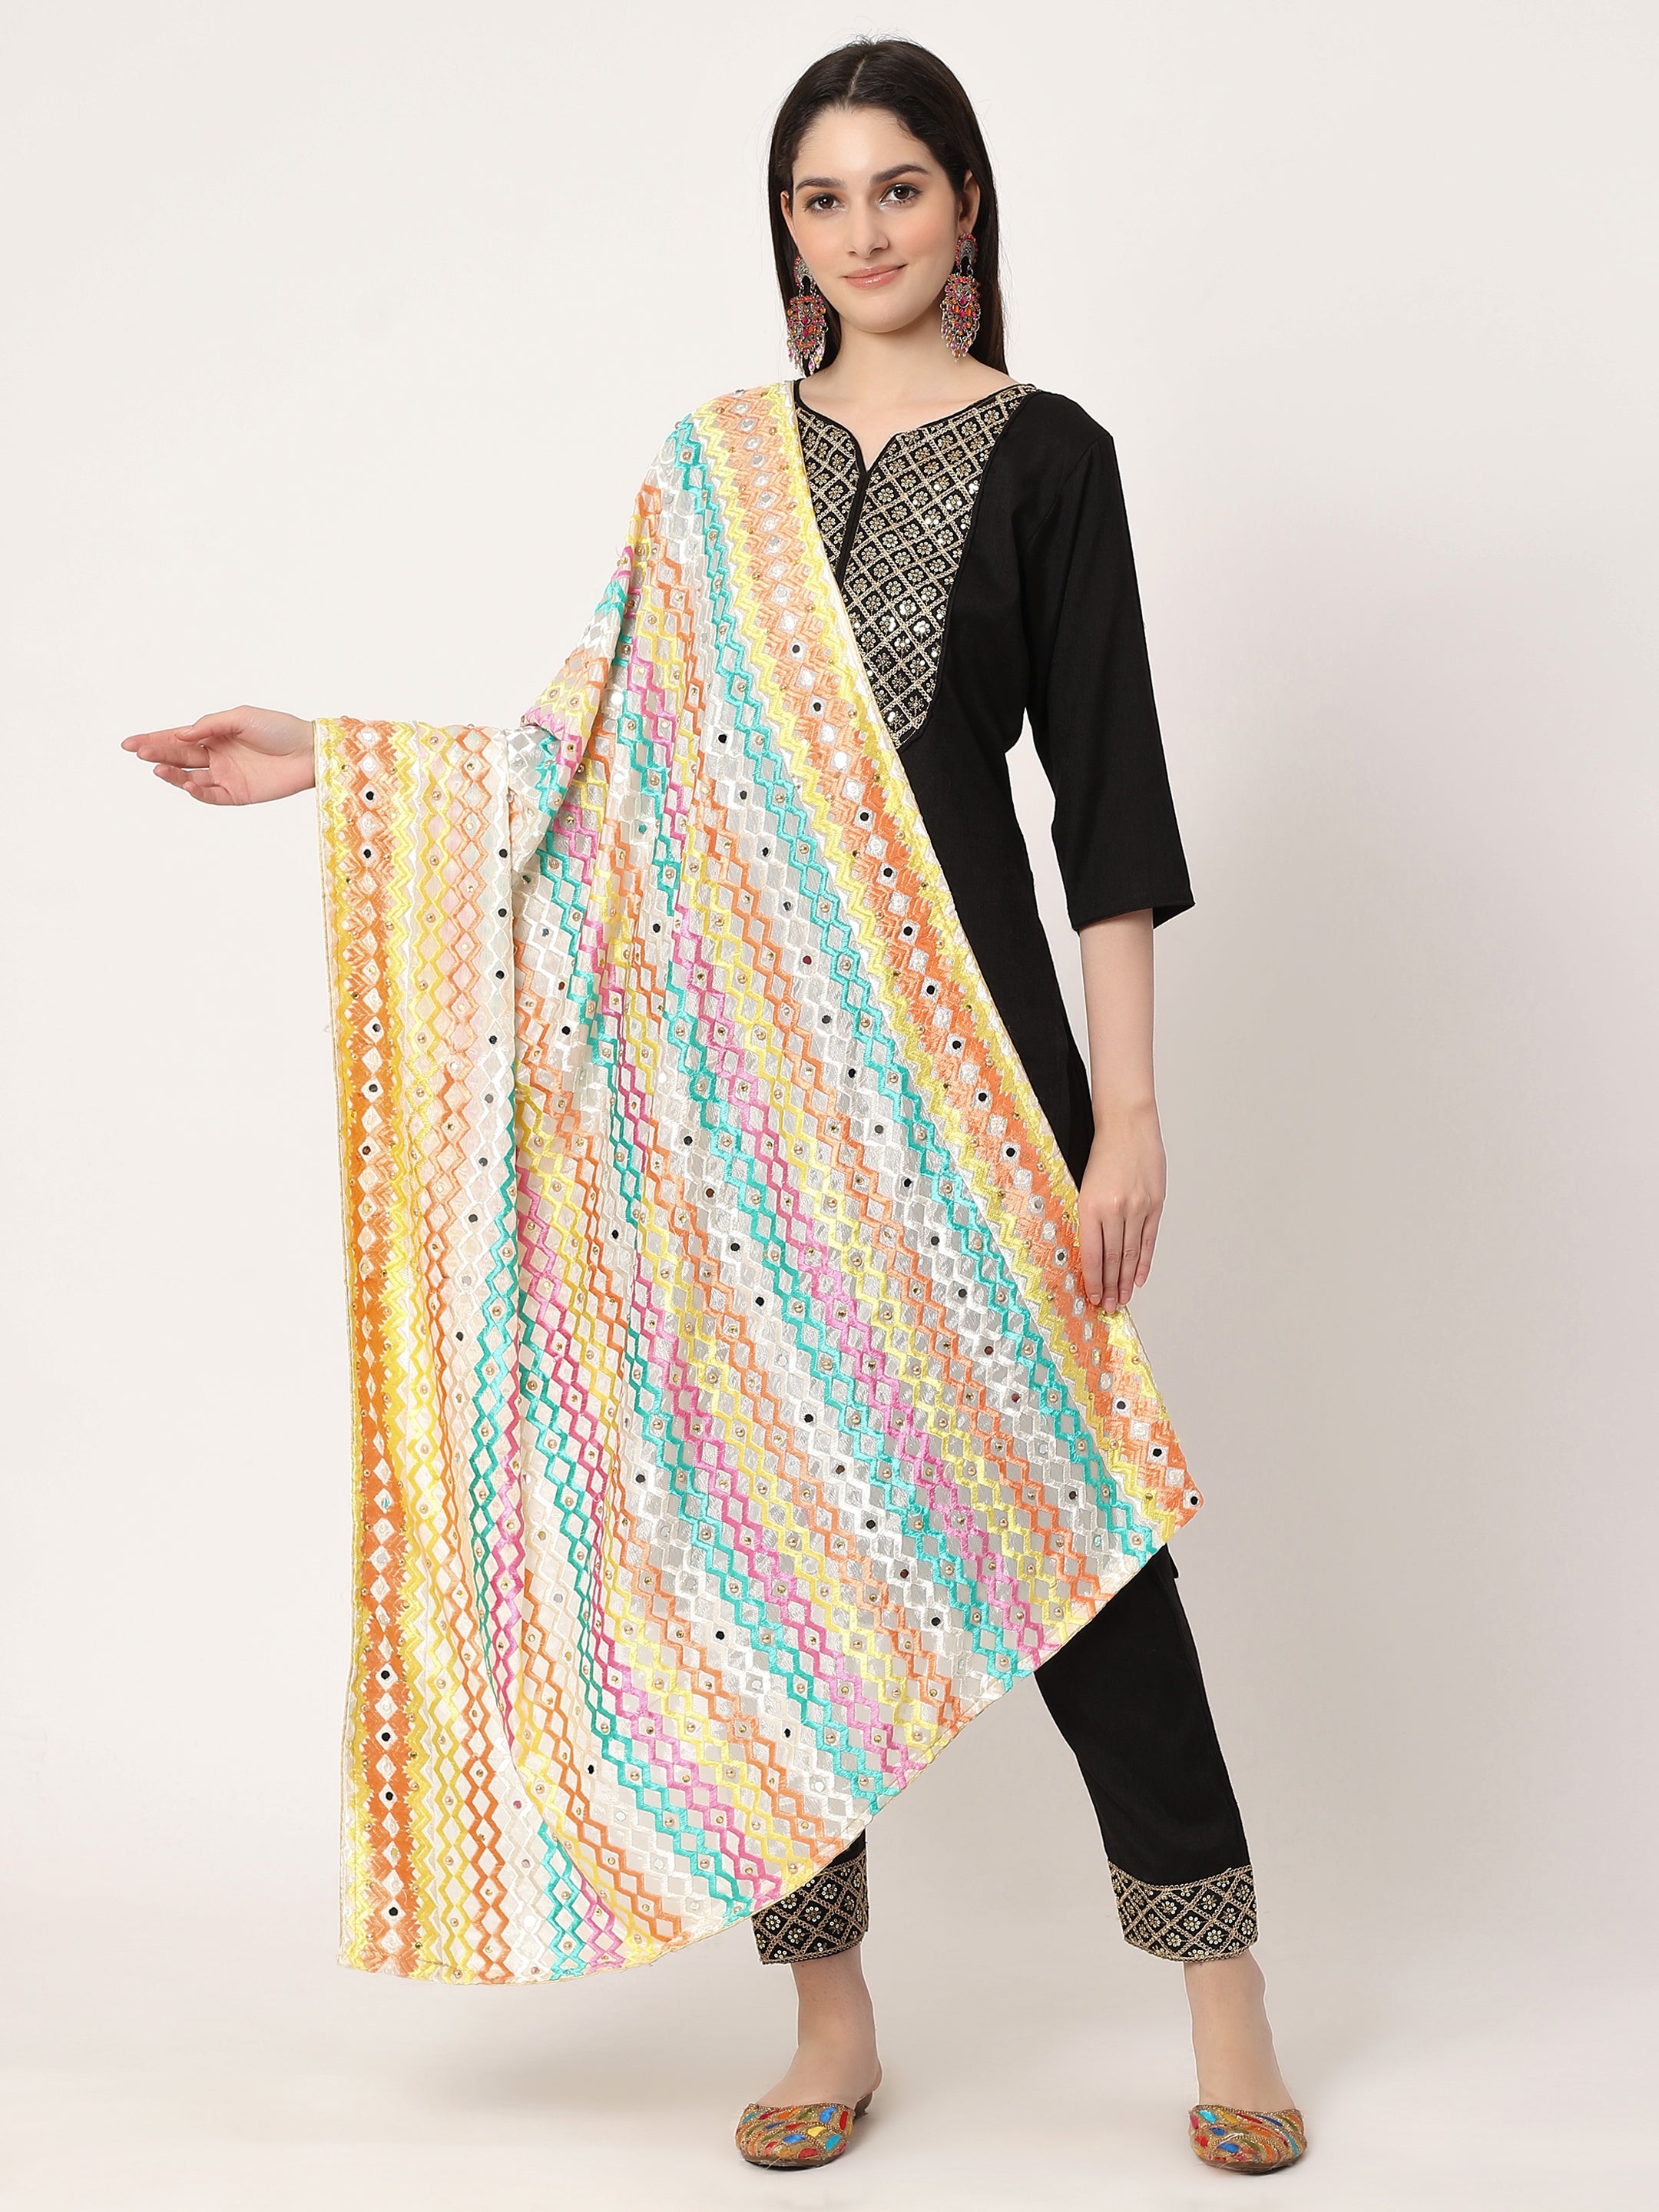 off-white-multicolour-embroidery-phulkari-dupatta-with-beads-and-pearl-mcrcpd0204-moda-chales-1